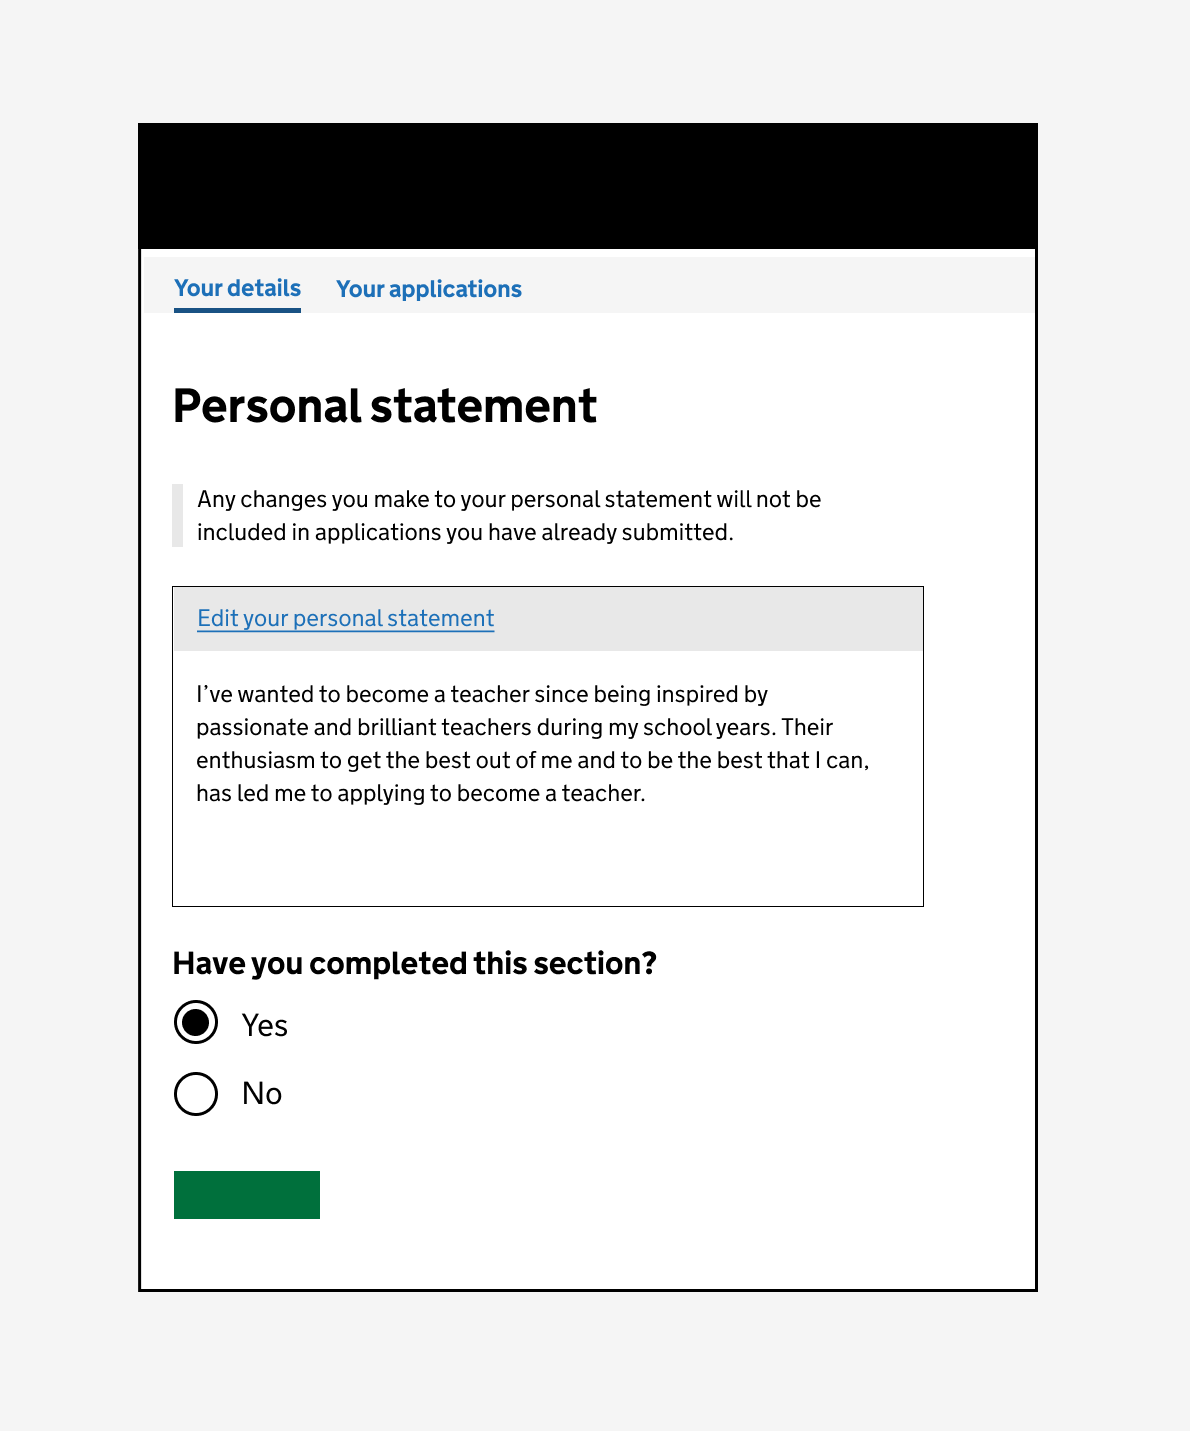 Illustration showing a screen with text telling the user that any changes they make to their personal statement will not be included in any application they've already submitted. The image also shows a preview of a presonal statement and a question asking the user if they've completed the section.